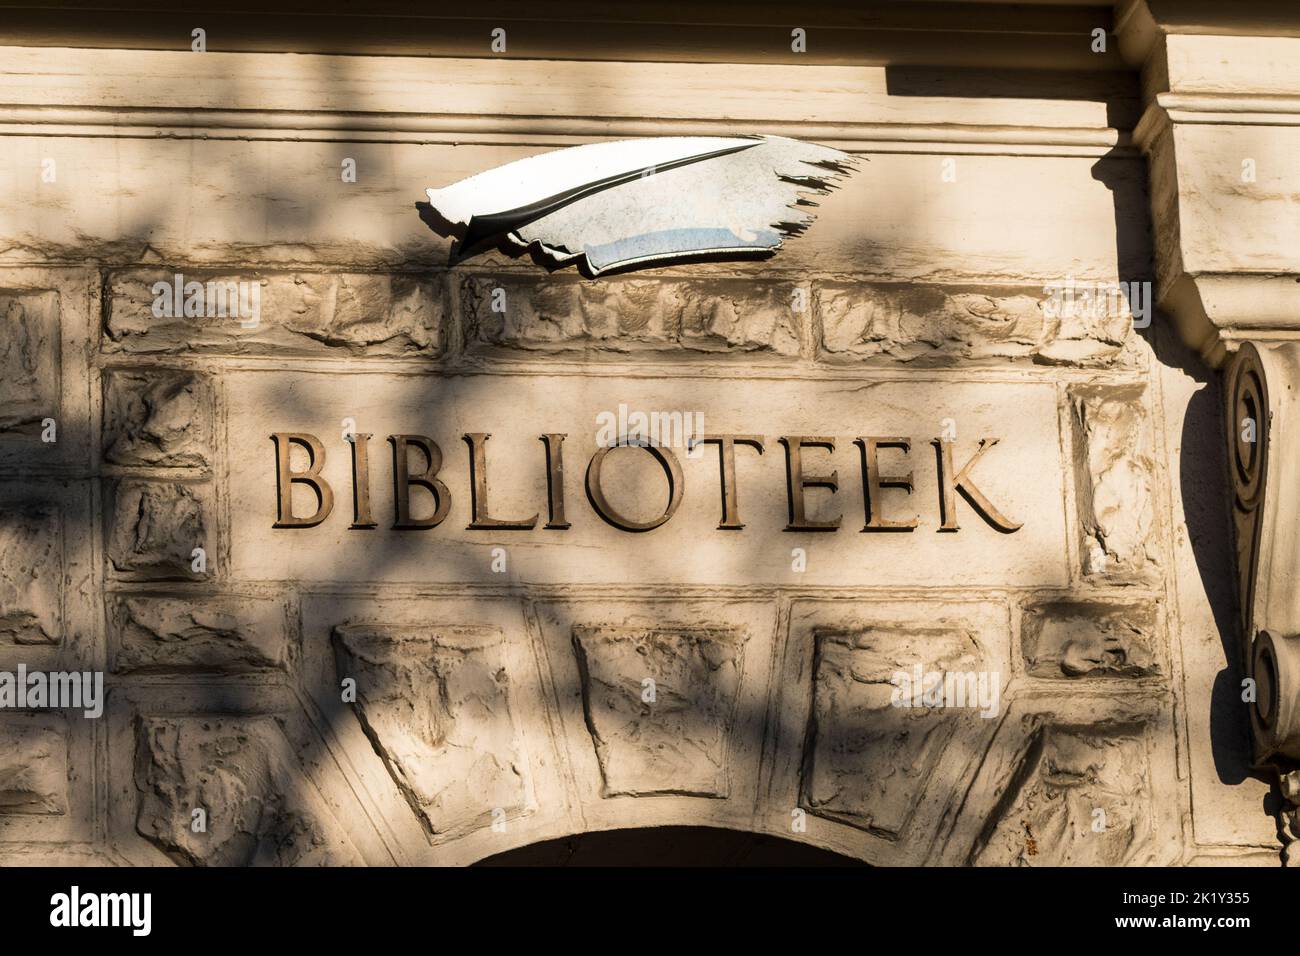 Biblioteek which translates into Library from Afrikaans which is an official language in South Africa Stock Photo